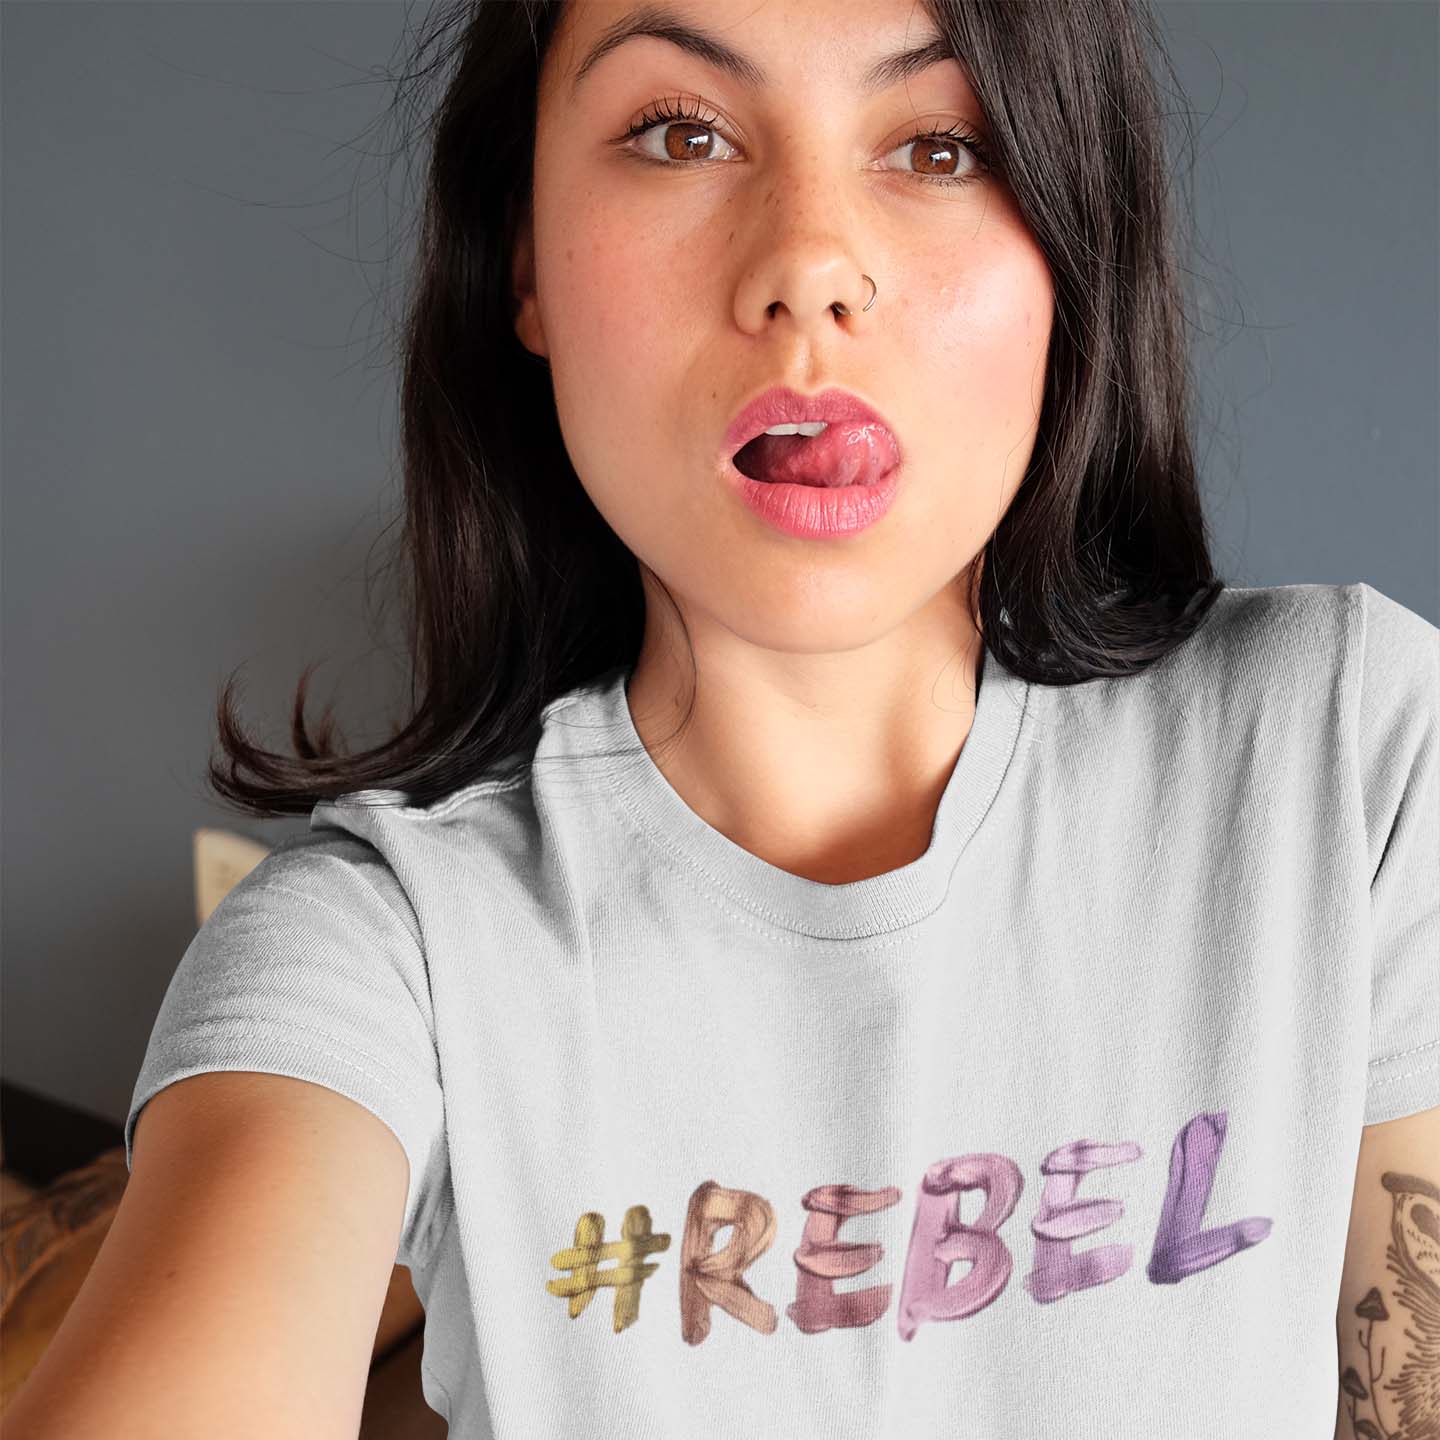 #REBEL ash t-shirt for women who are rebels! Tell me, what makes you a rebel and would you wear this rebellious t-shirt? #WEIRDO fashion brand.